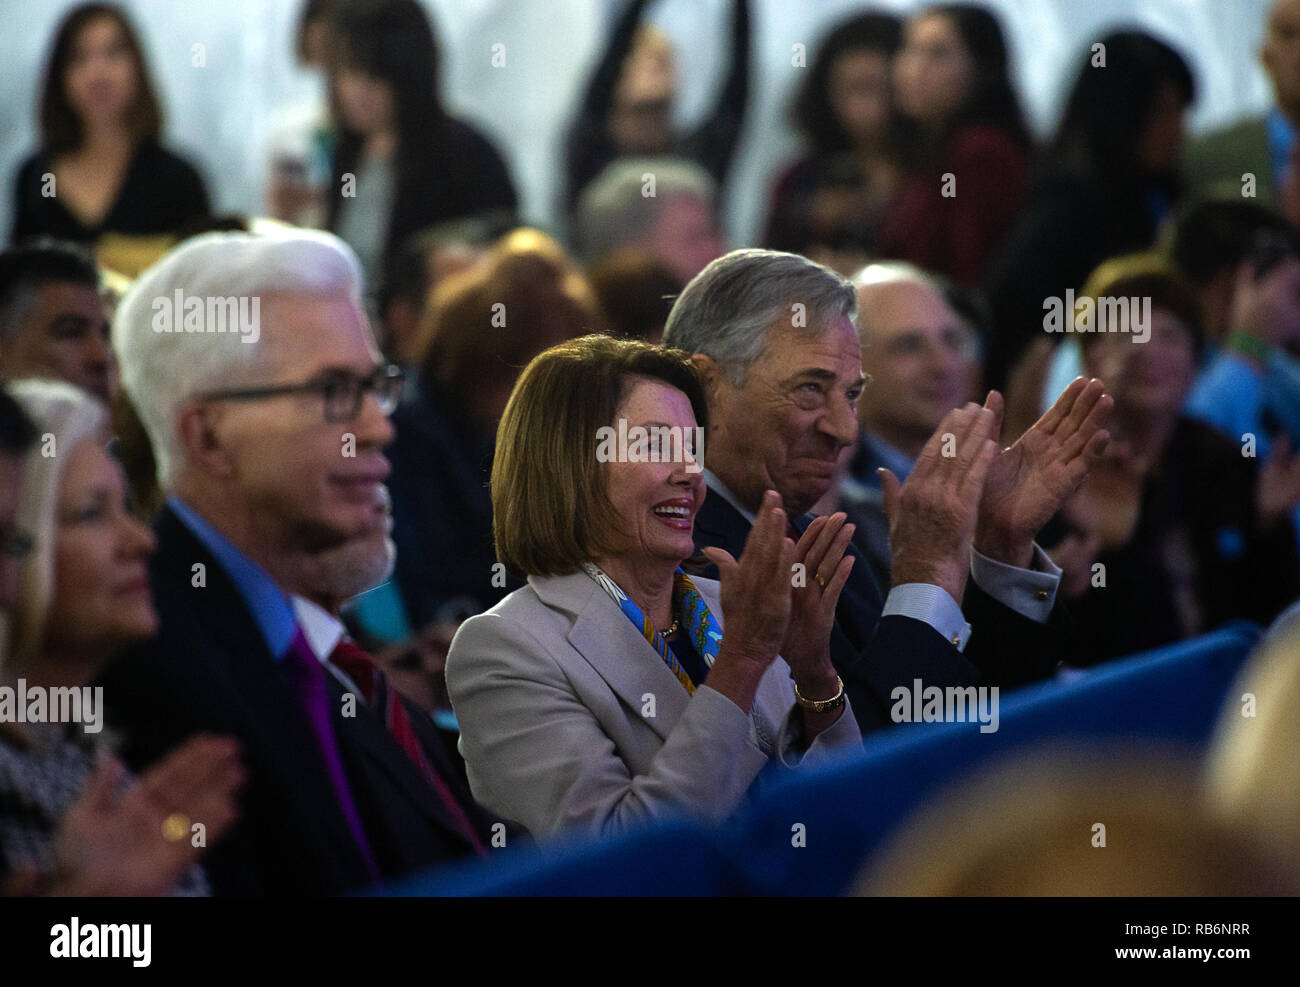 Sacramento, CA, USA. 7th Jan, 2019. Speaker of the House Nancy Pelosi and her husband Paul Pelosi applaud Voices of Destiny during the inauguration at the State Capital on Monday, January 7, 2019 in Sacramento. Credit: Paul Kitagaki Jr./ZUMA Wire/Alamy Live News Stock Photo